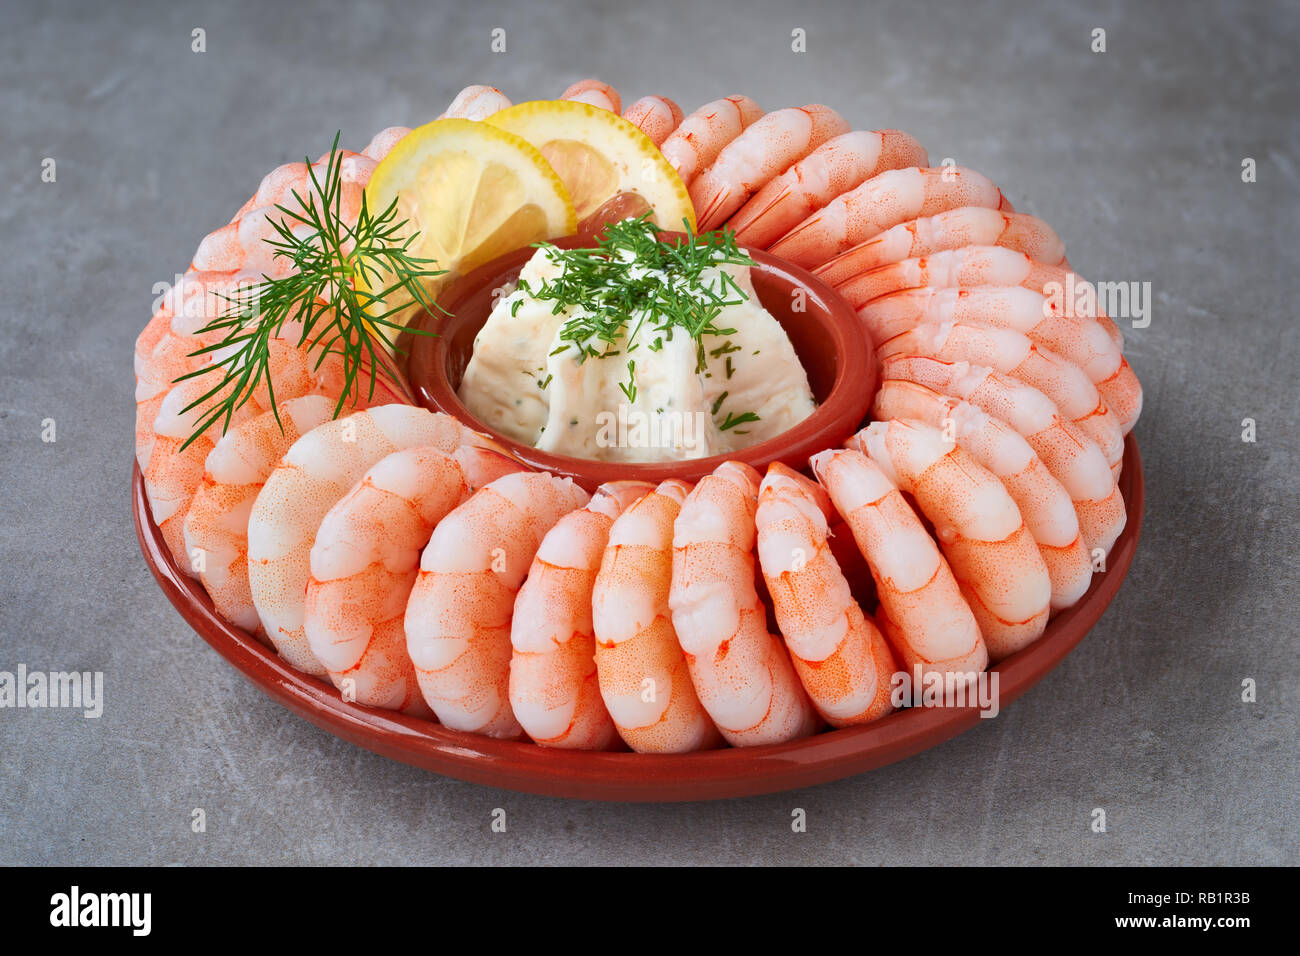 Close-up on shrimp ring with fresh cheese, dill and lemon on light concrete background Stock Photo